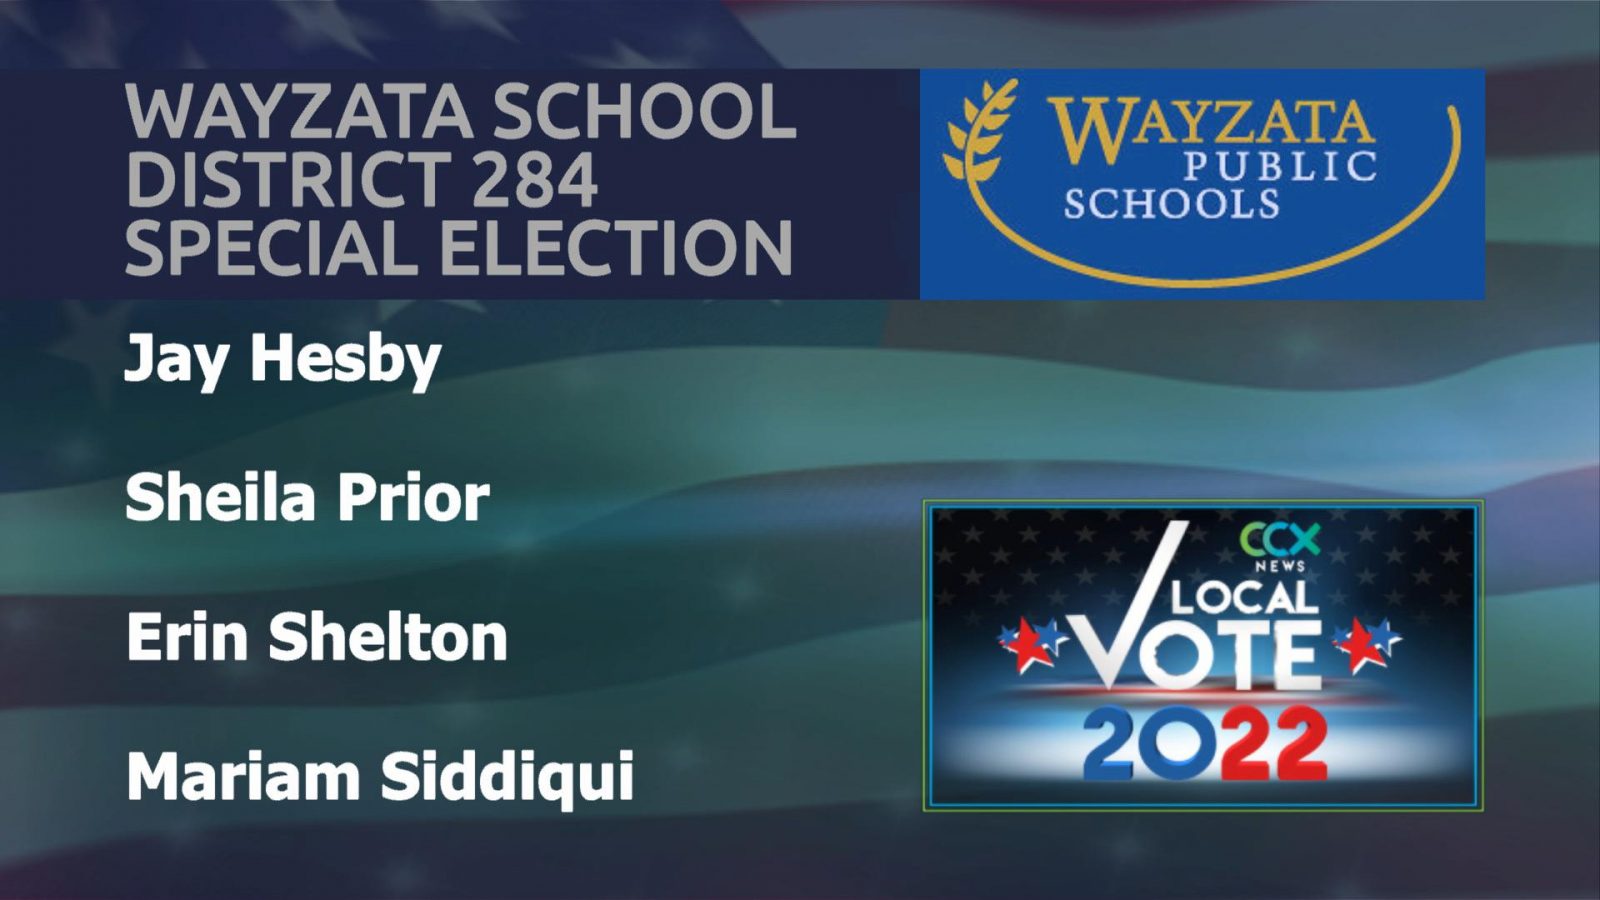 Four Candidates Running in Special Election for Wayzata School Board